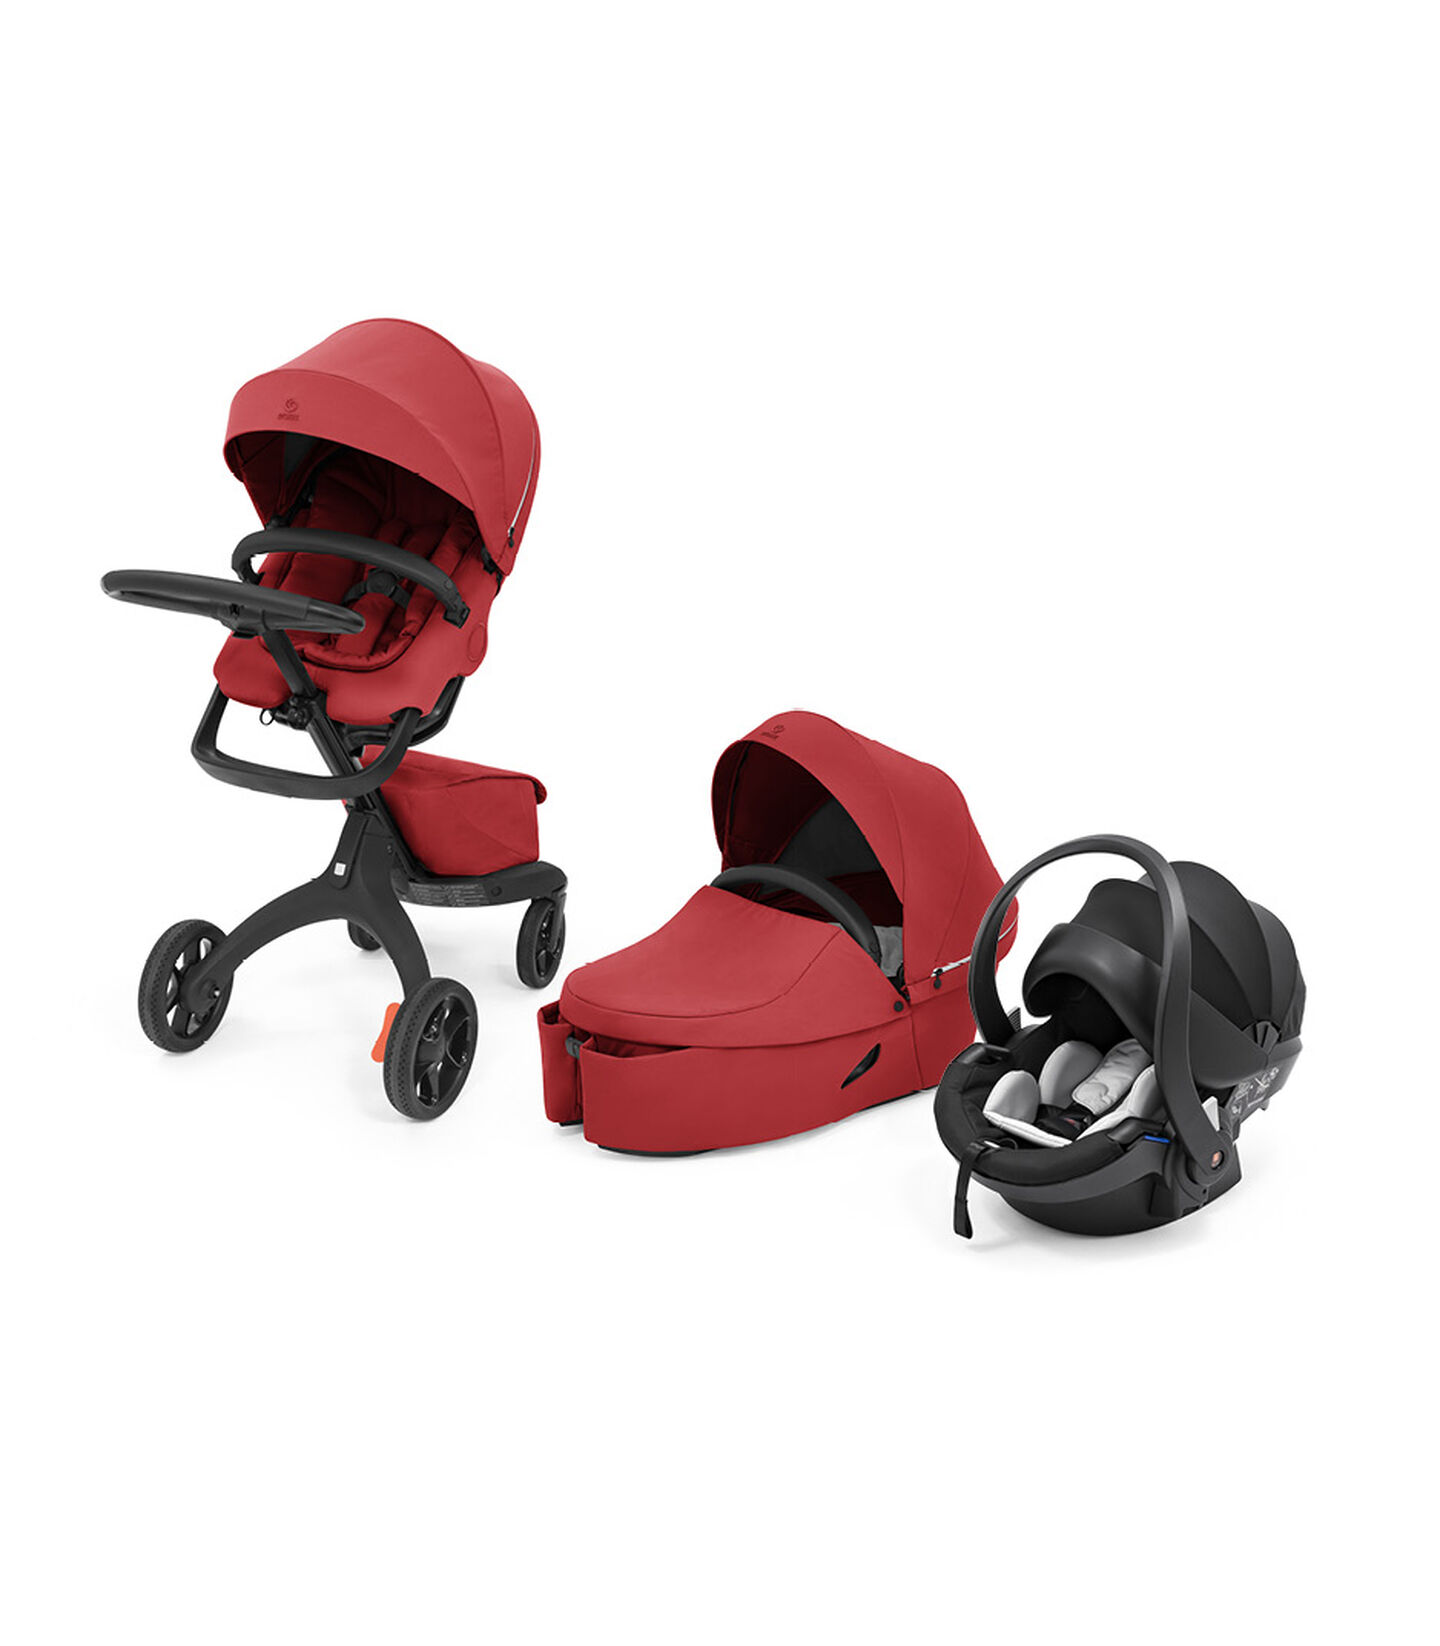 Stokke® Xplory® X Rouge Rubis, Rouge Rubis, mainview view 10